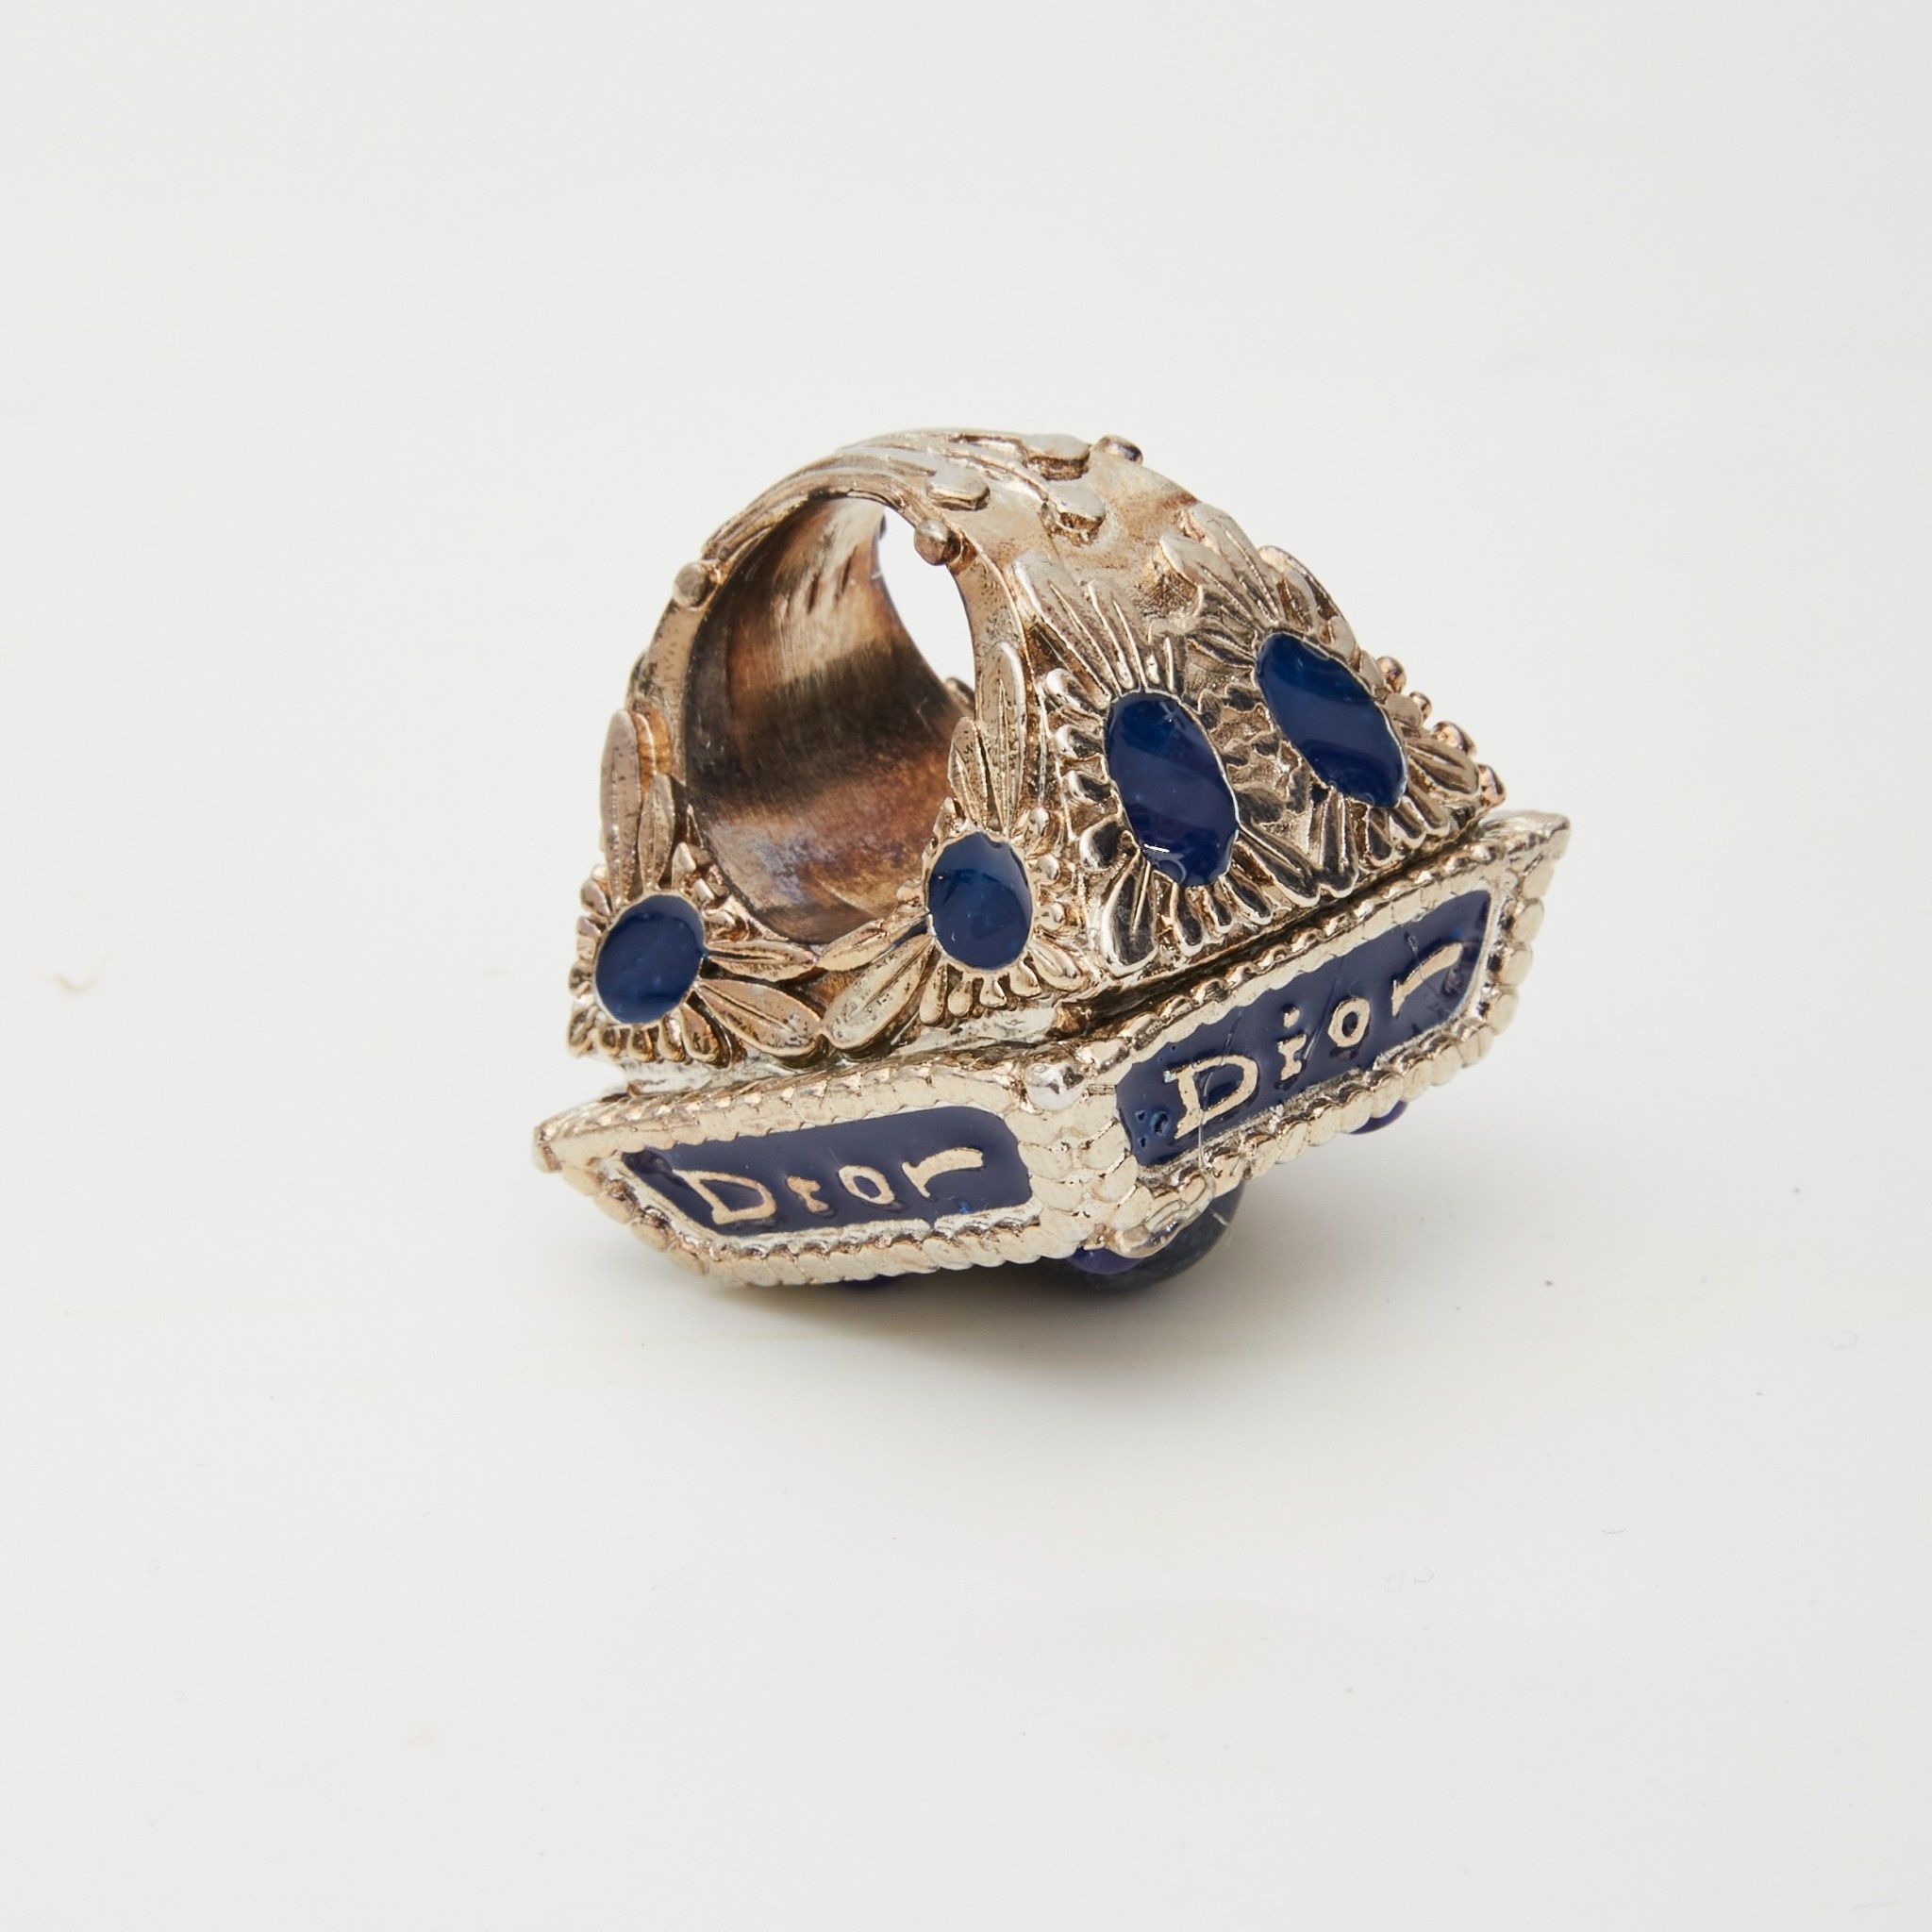 Christian Dior Vintage Gold And Diamond Ring Available For Immediate Sale  At Sothebys